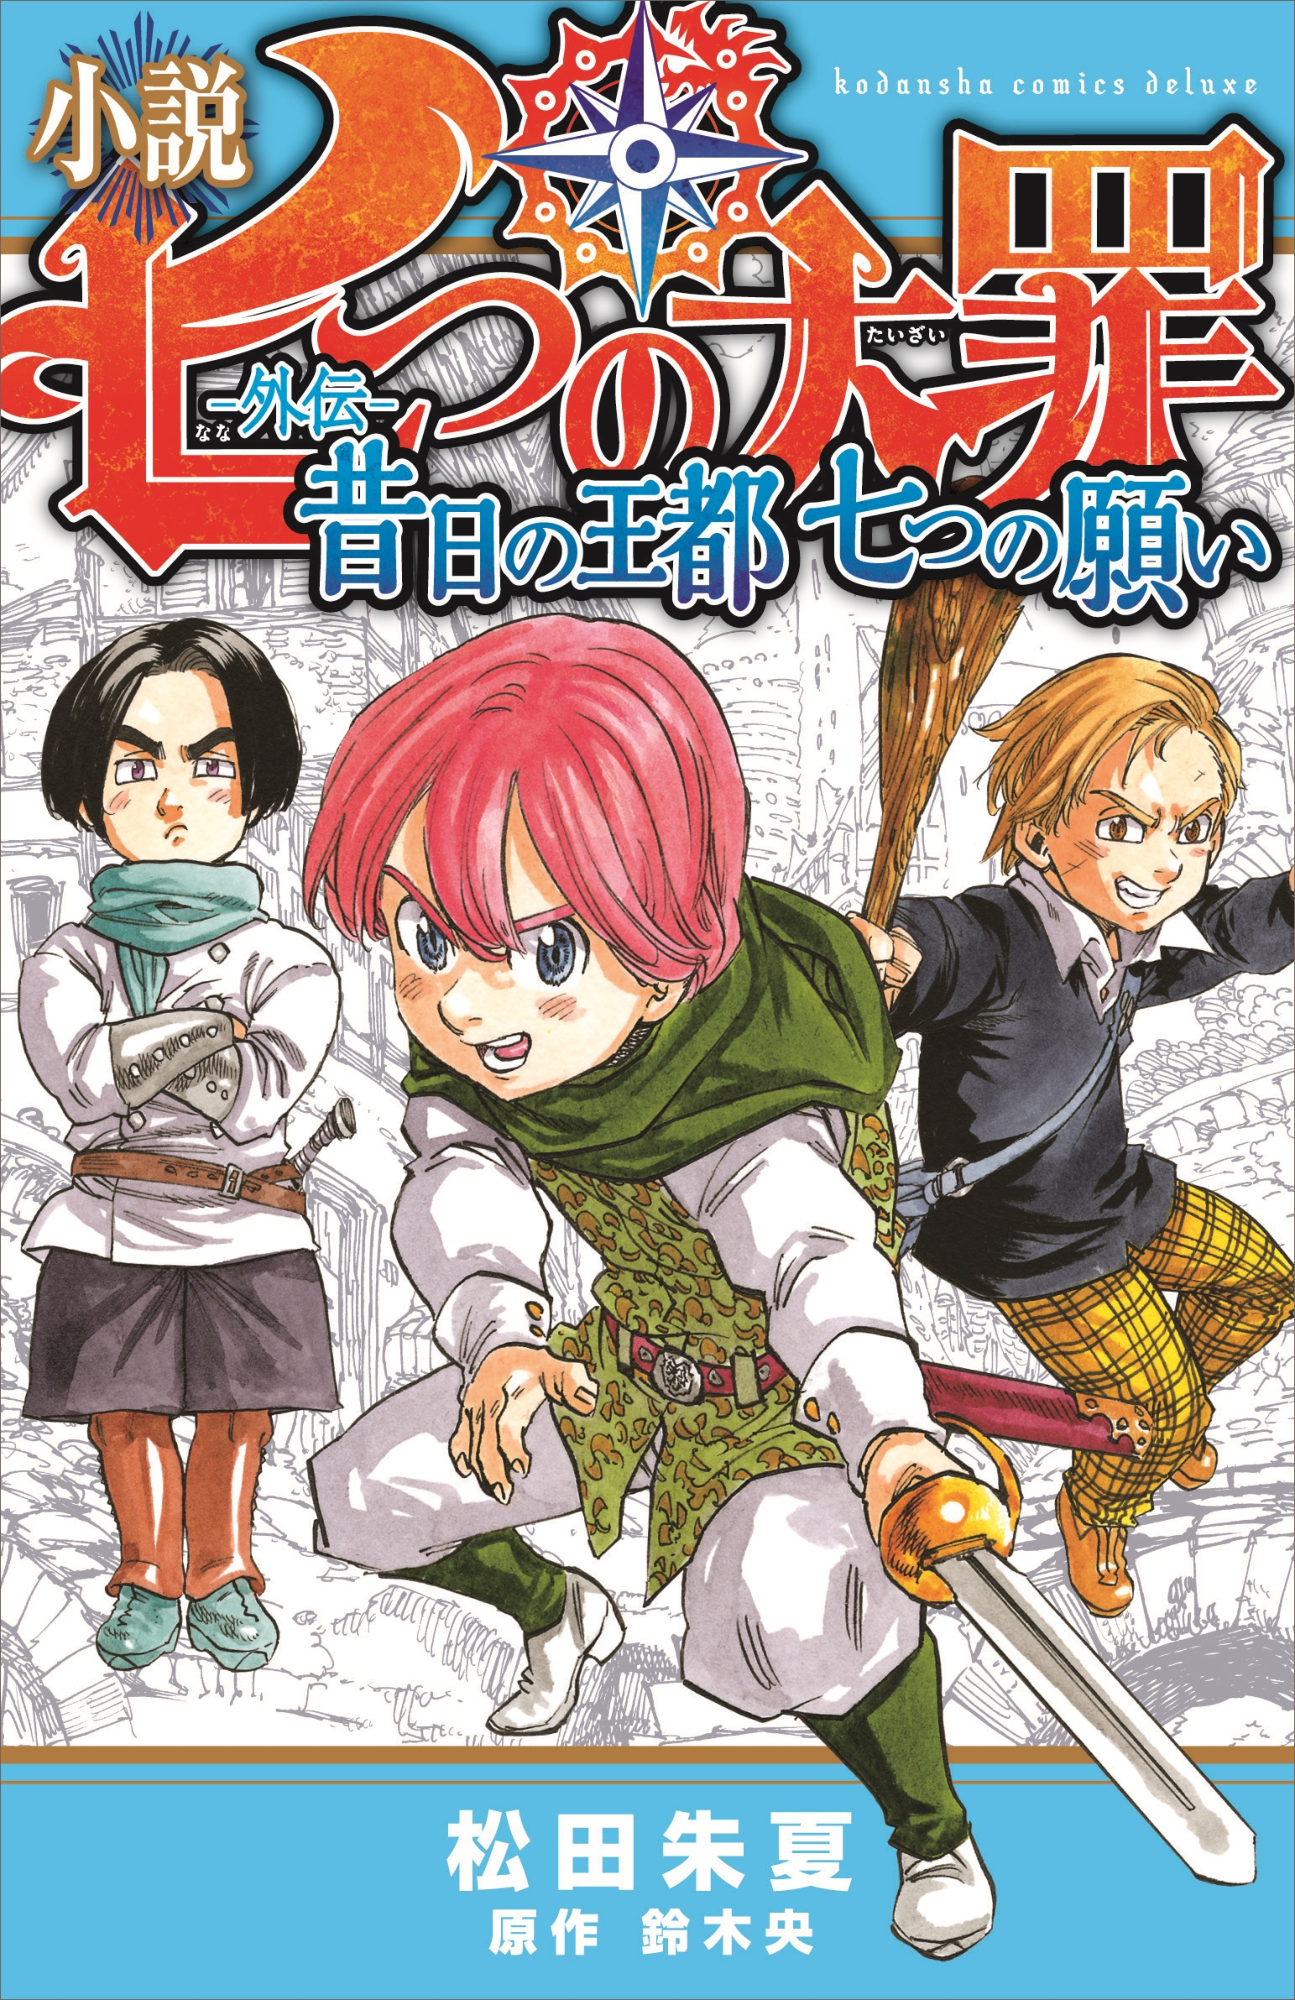 The Seven Deadly Sins: Seven-Colored Recollections (Light Novel